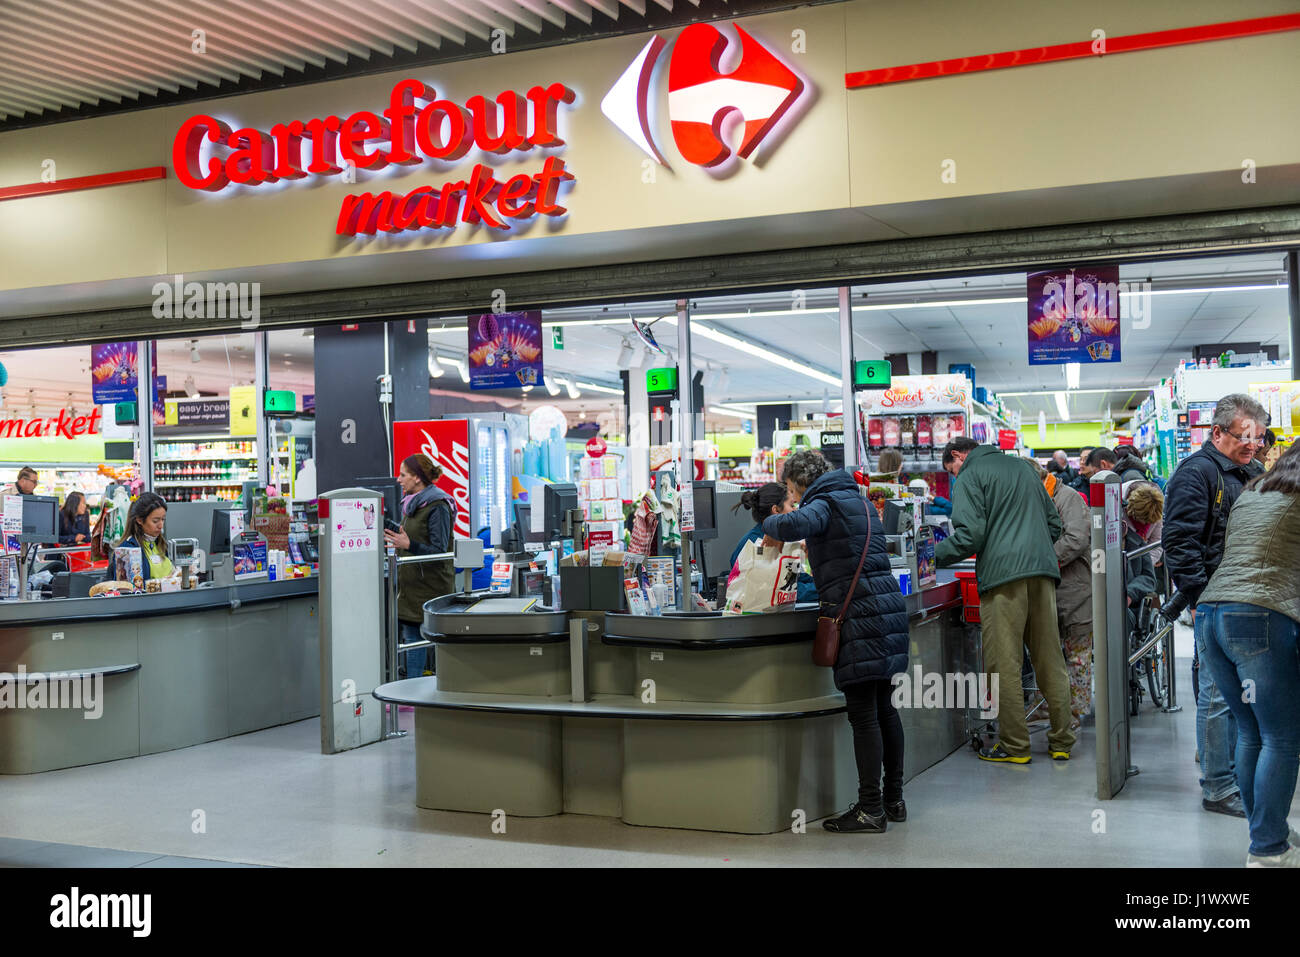 Carrefour Market High Resolution Stock Photography and Images - Alamy